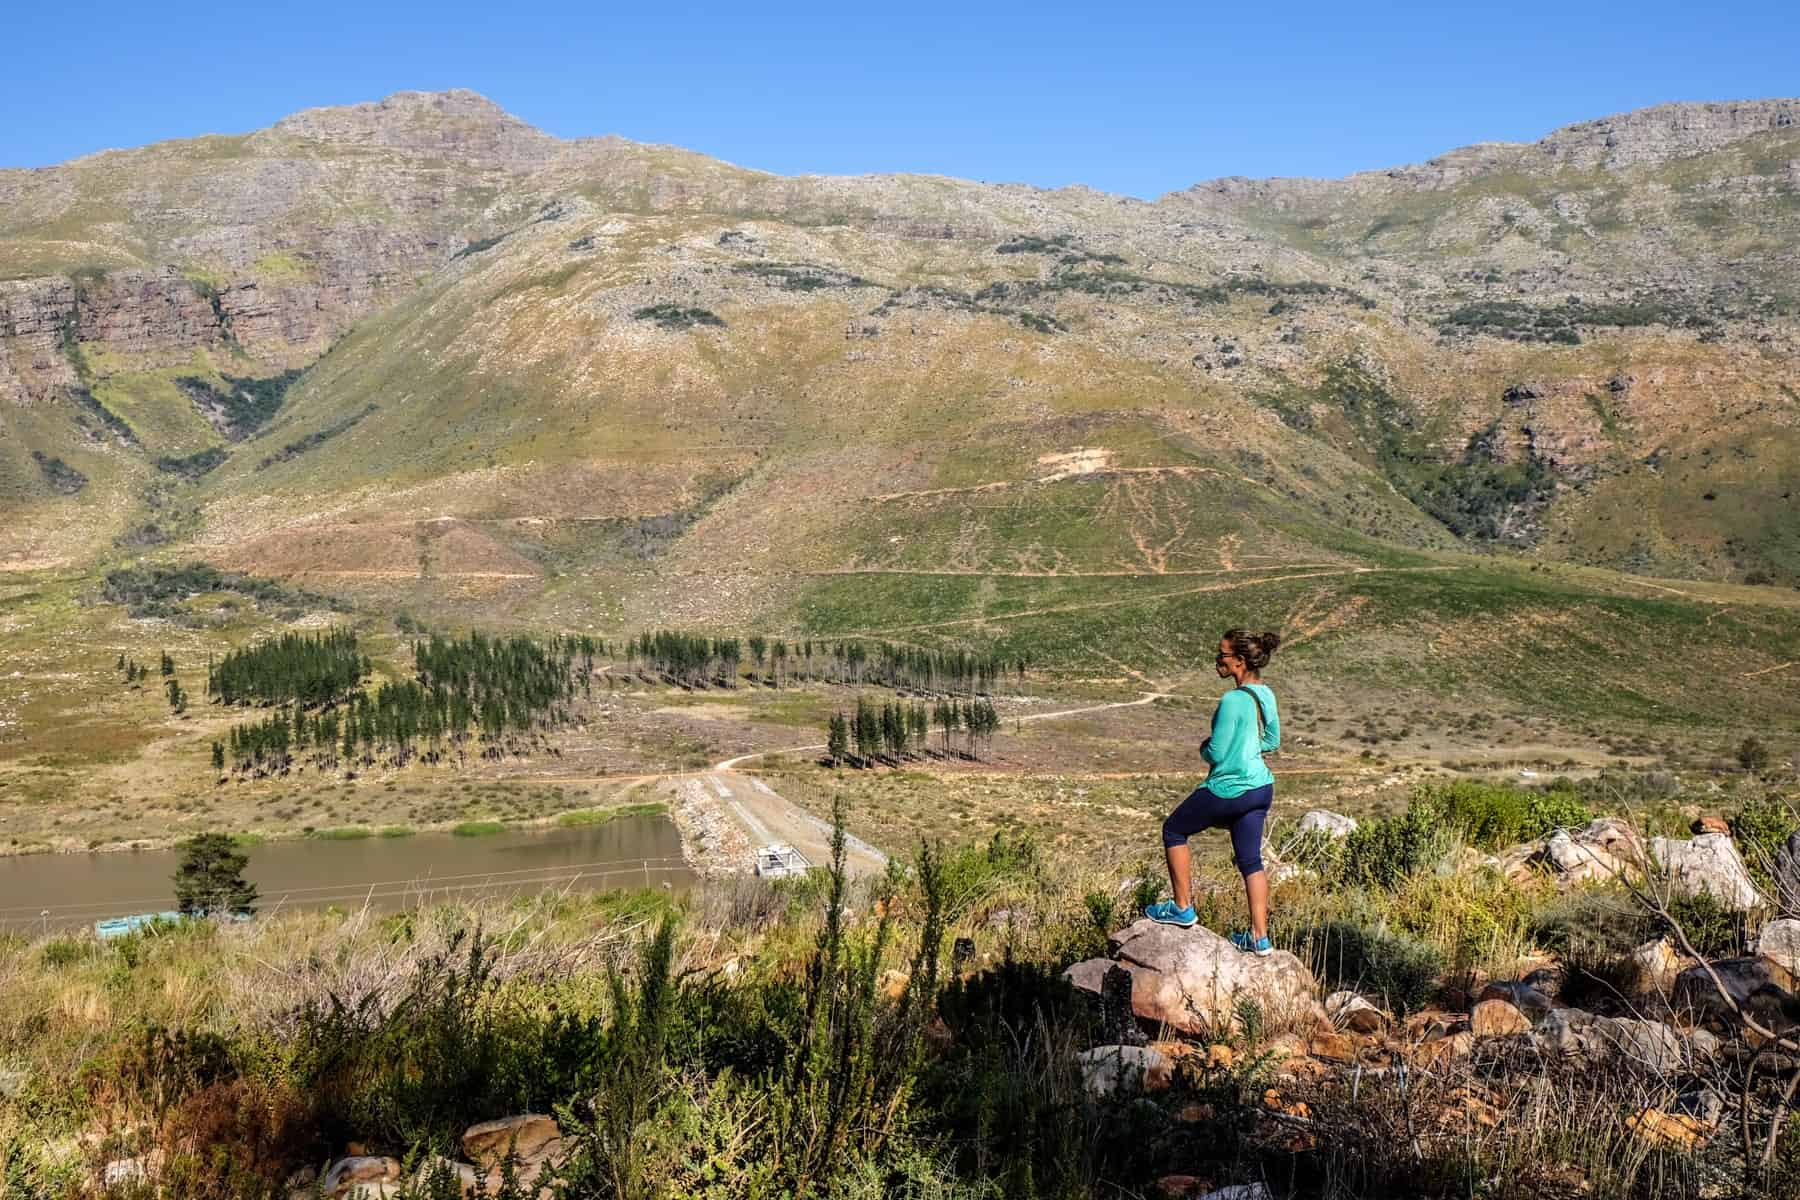 A woman wearing green stands on a rock in the middle of a vast and open green area backed by silvery, rocky hills. A small section of Jonkershoek Nature Reserve in the Western Cape.